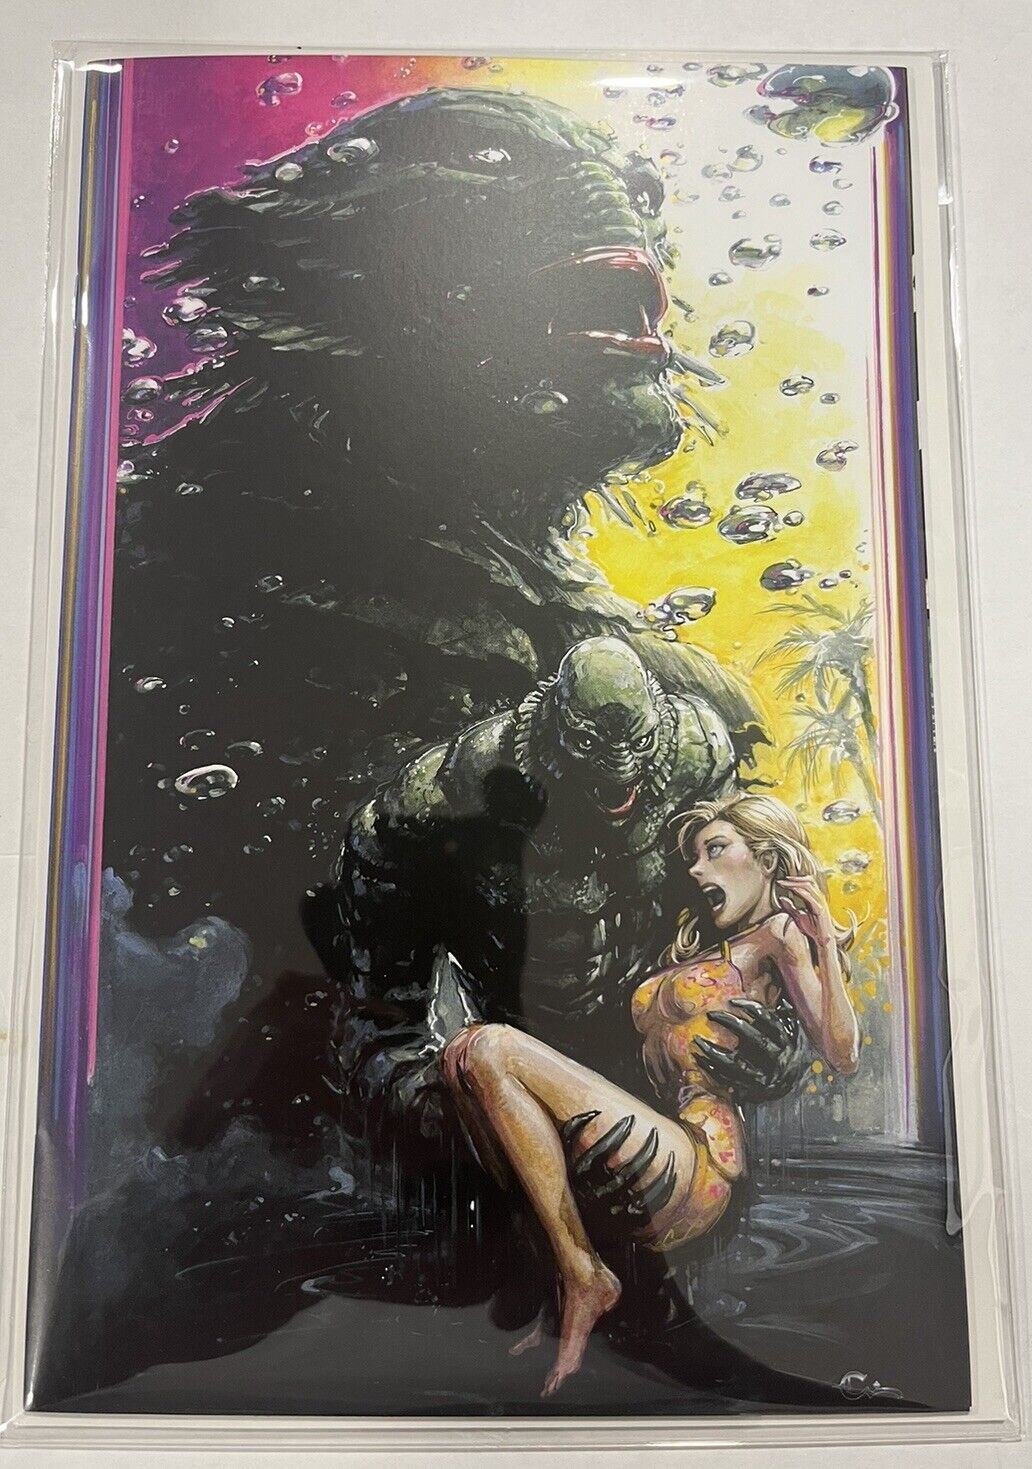 CREATURE FROM THE BLACK LAGOON LIVES #1 CLAYTON CRAIN VARIANT IN HAND NM++